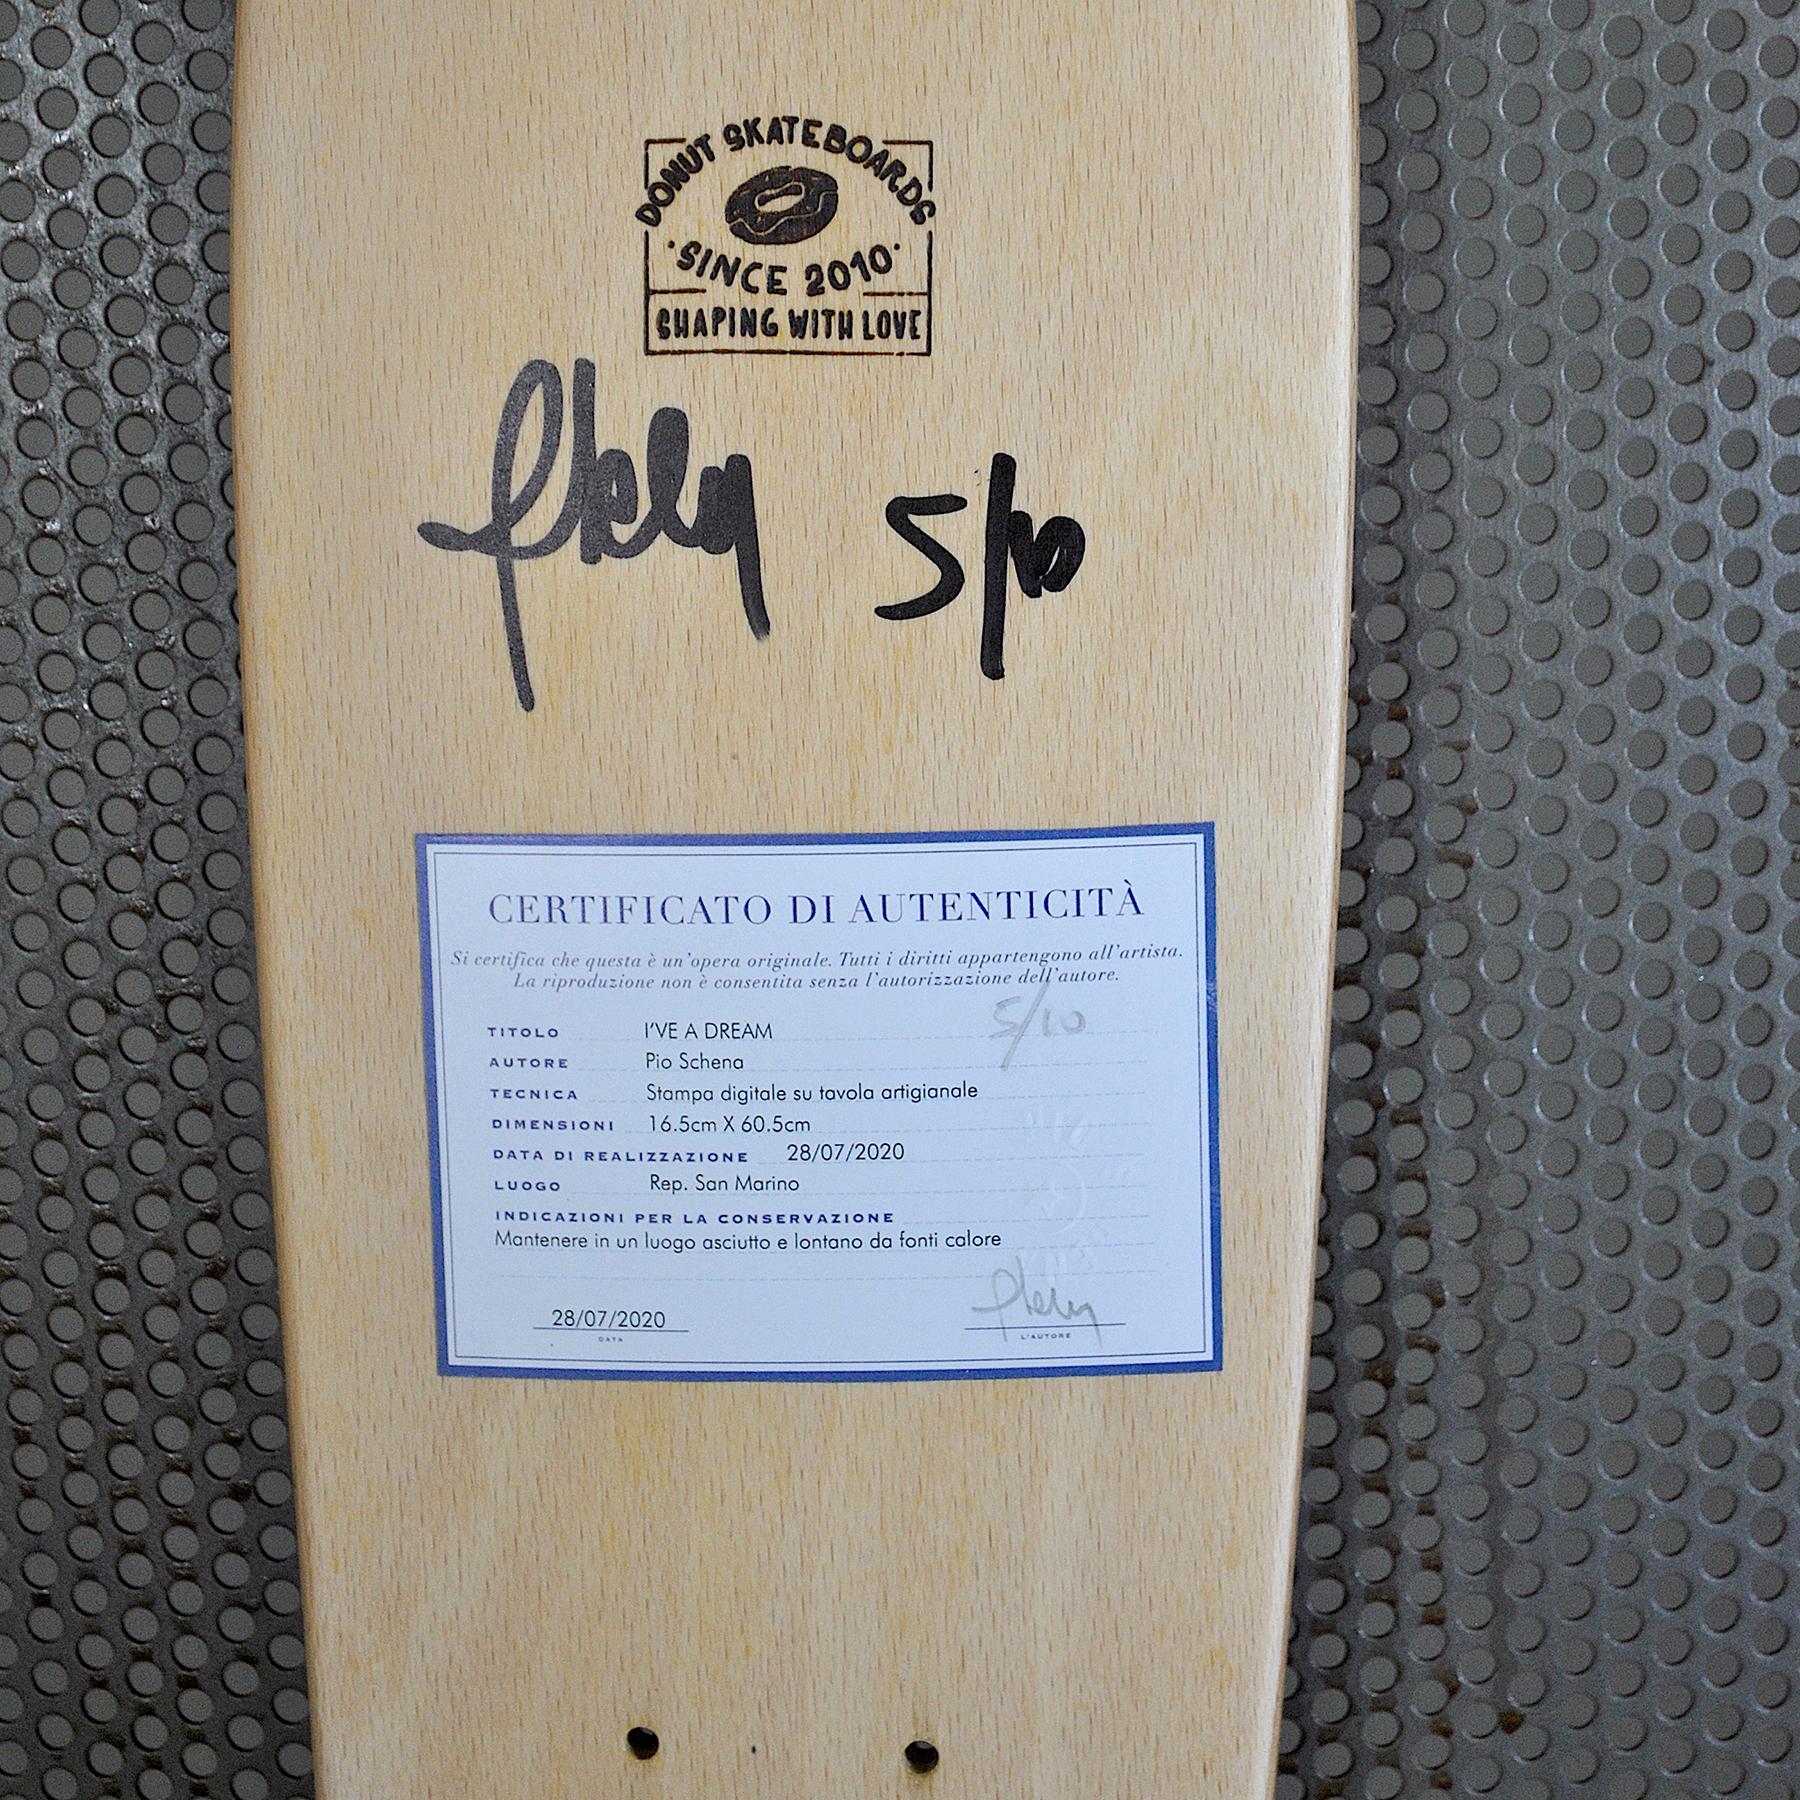 Skate Deck Handmade Limited Edition by Pio Schena In Excellent Condition For Sale In bari, IT